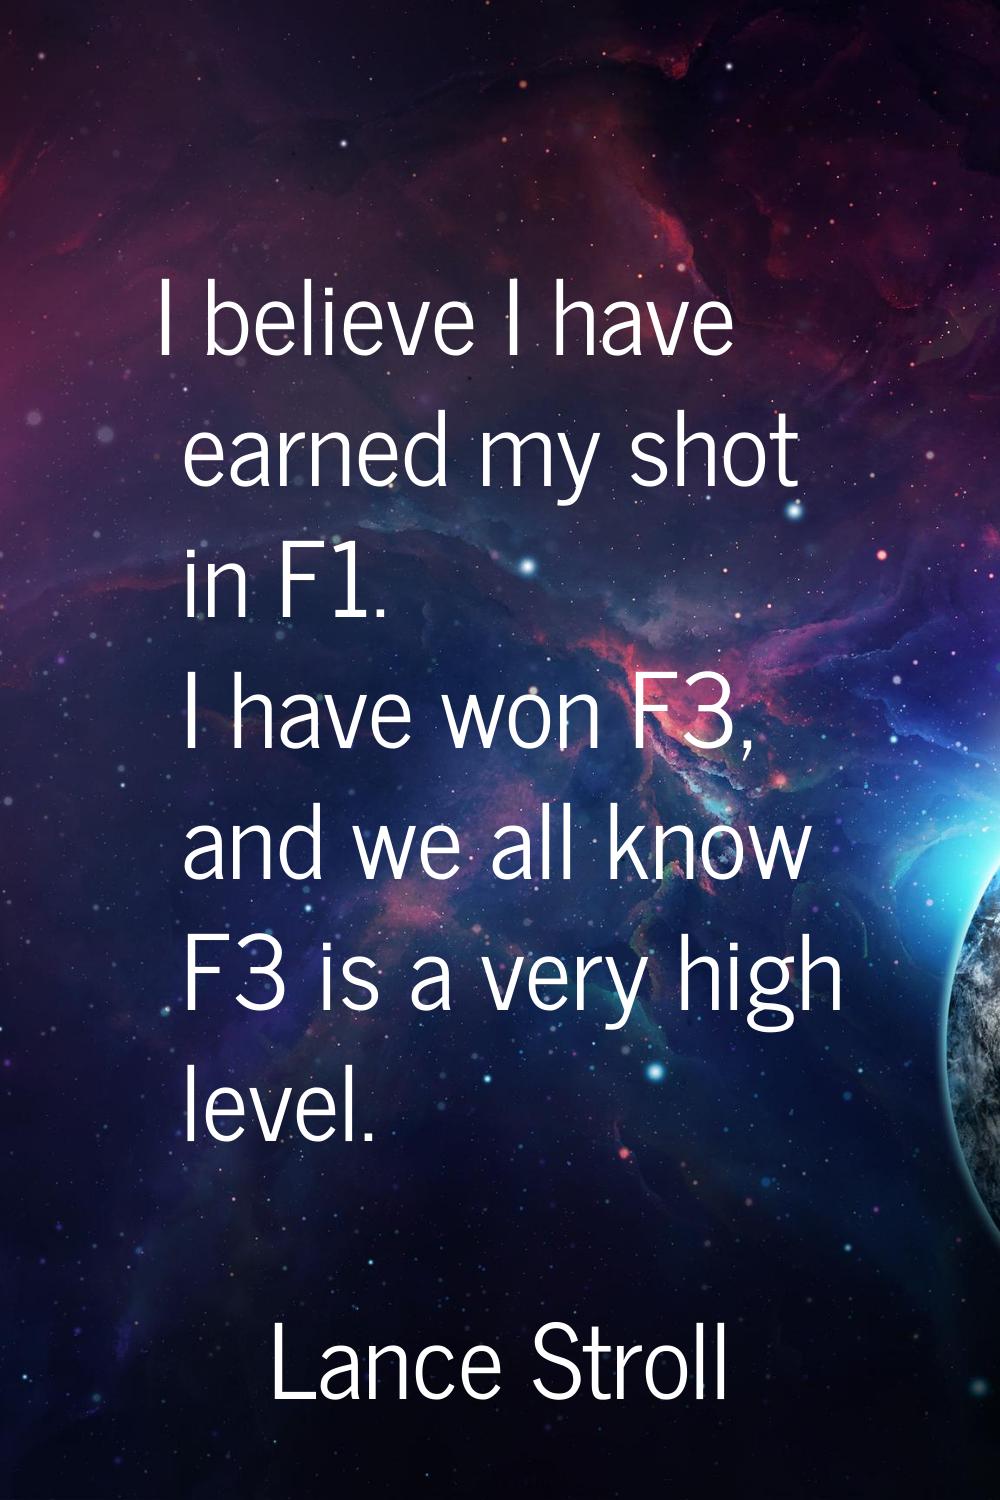 I believe I have earned my shot in F1. I have won F3, and we all know F3 is a very high level.